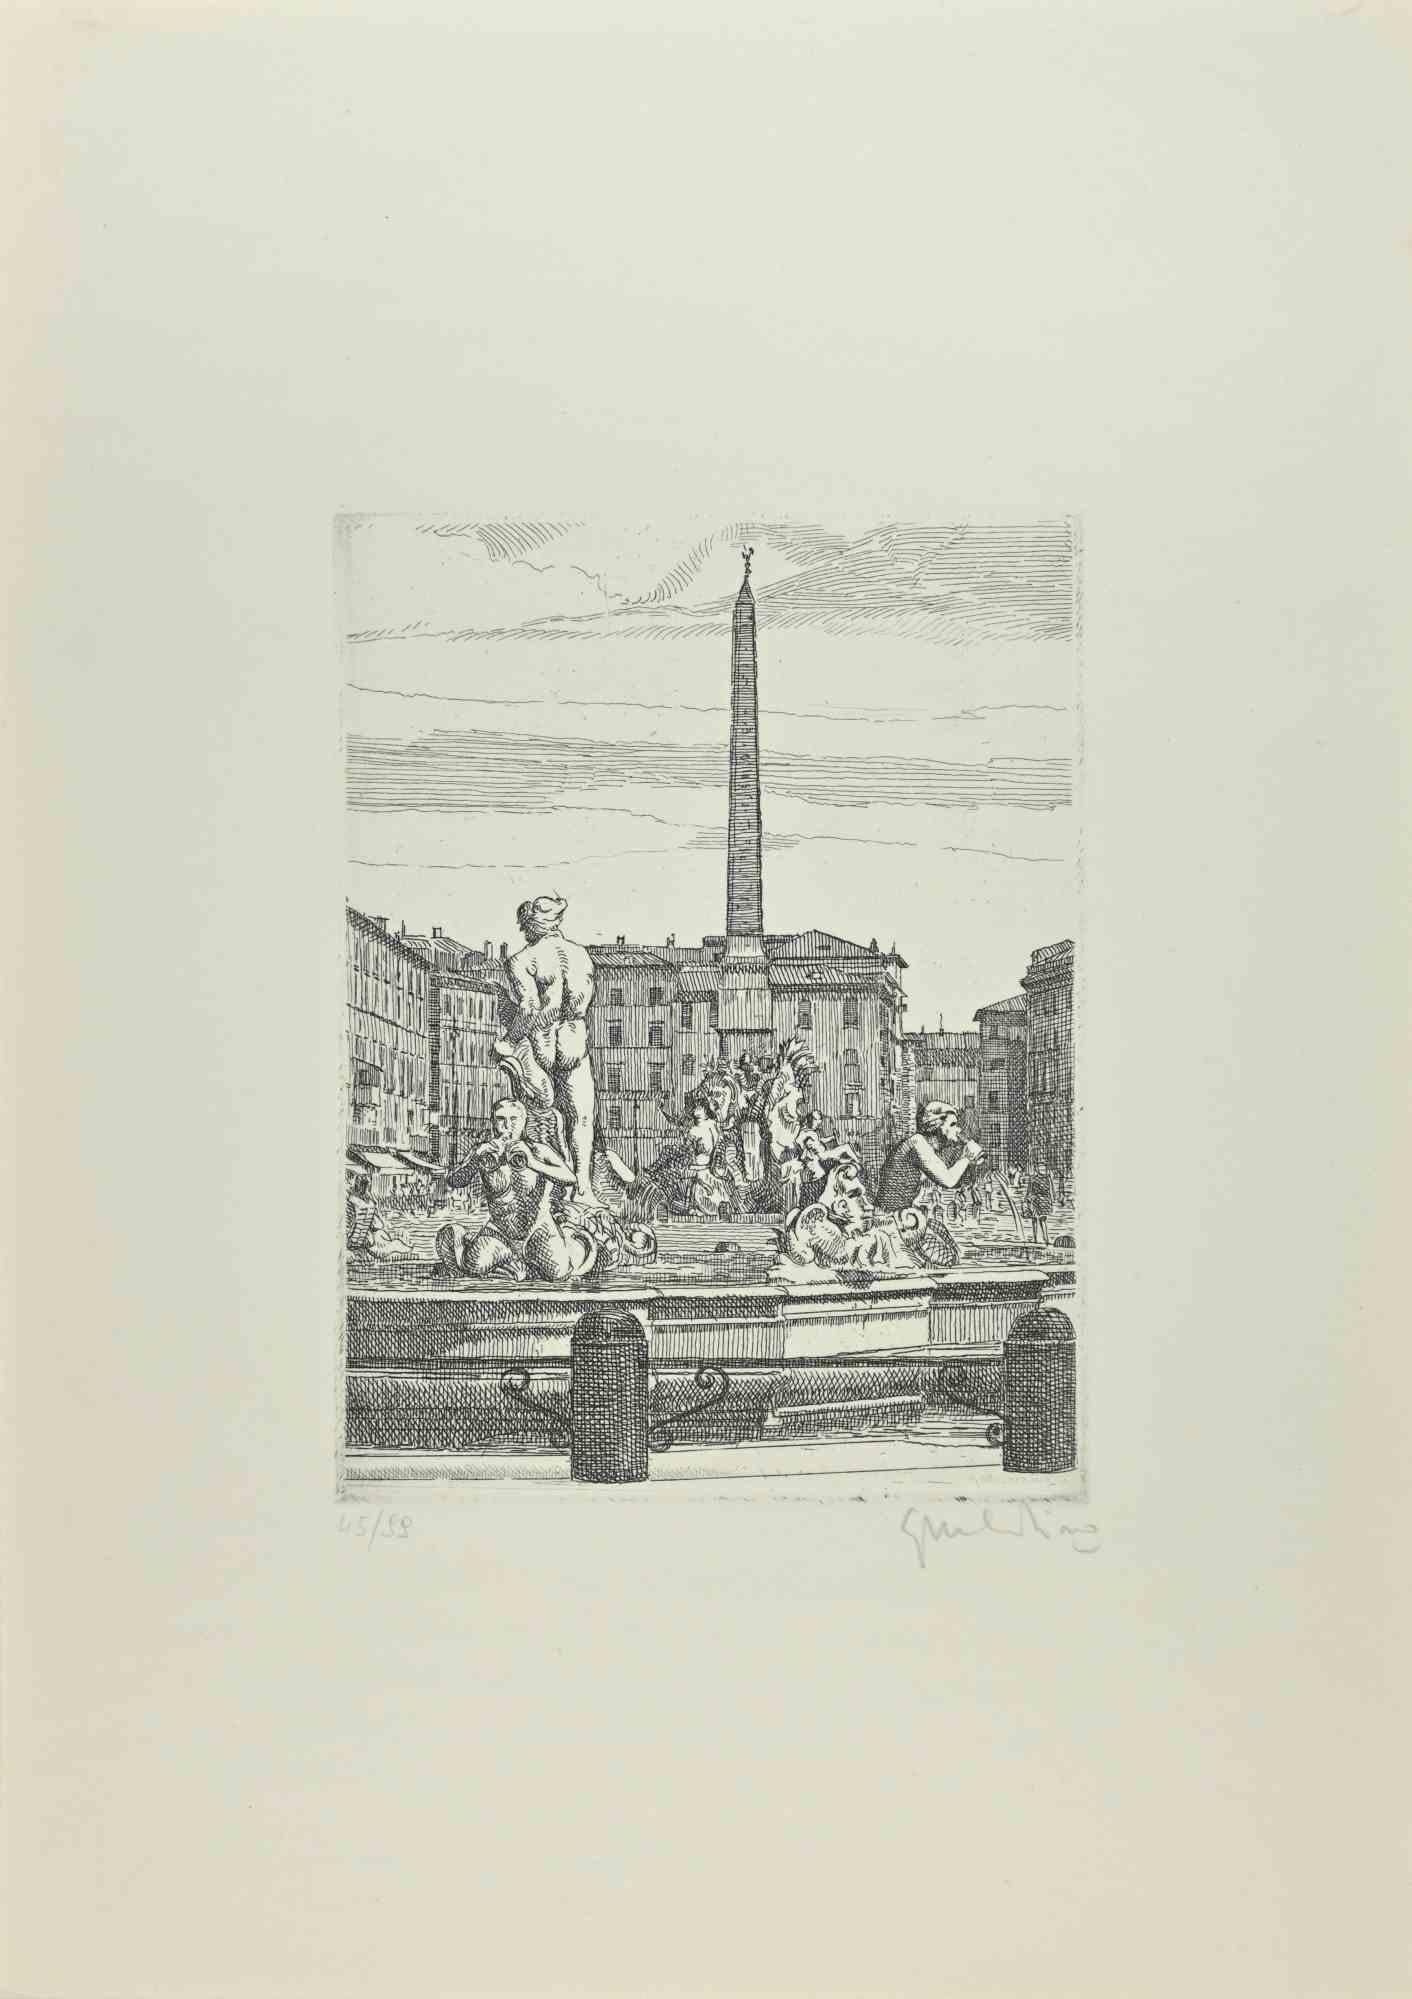 Navona Square - Fountain of 4 Rivers is an artwork realized by Giuseppe Malandrino.

Print in etching technique.

Hand-signed by the artist in pencil on the lower right corner.

Numbered edition of 99 copies.

Good condition. 

This artwork